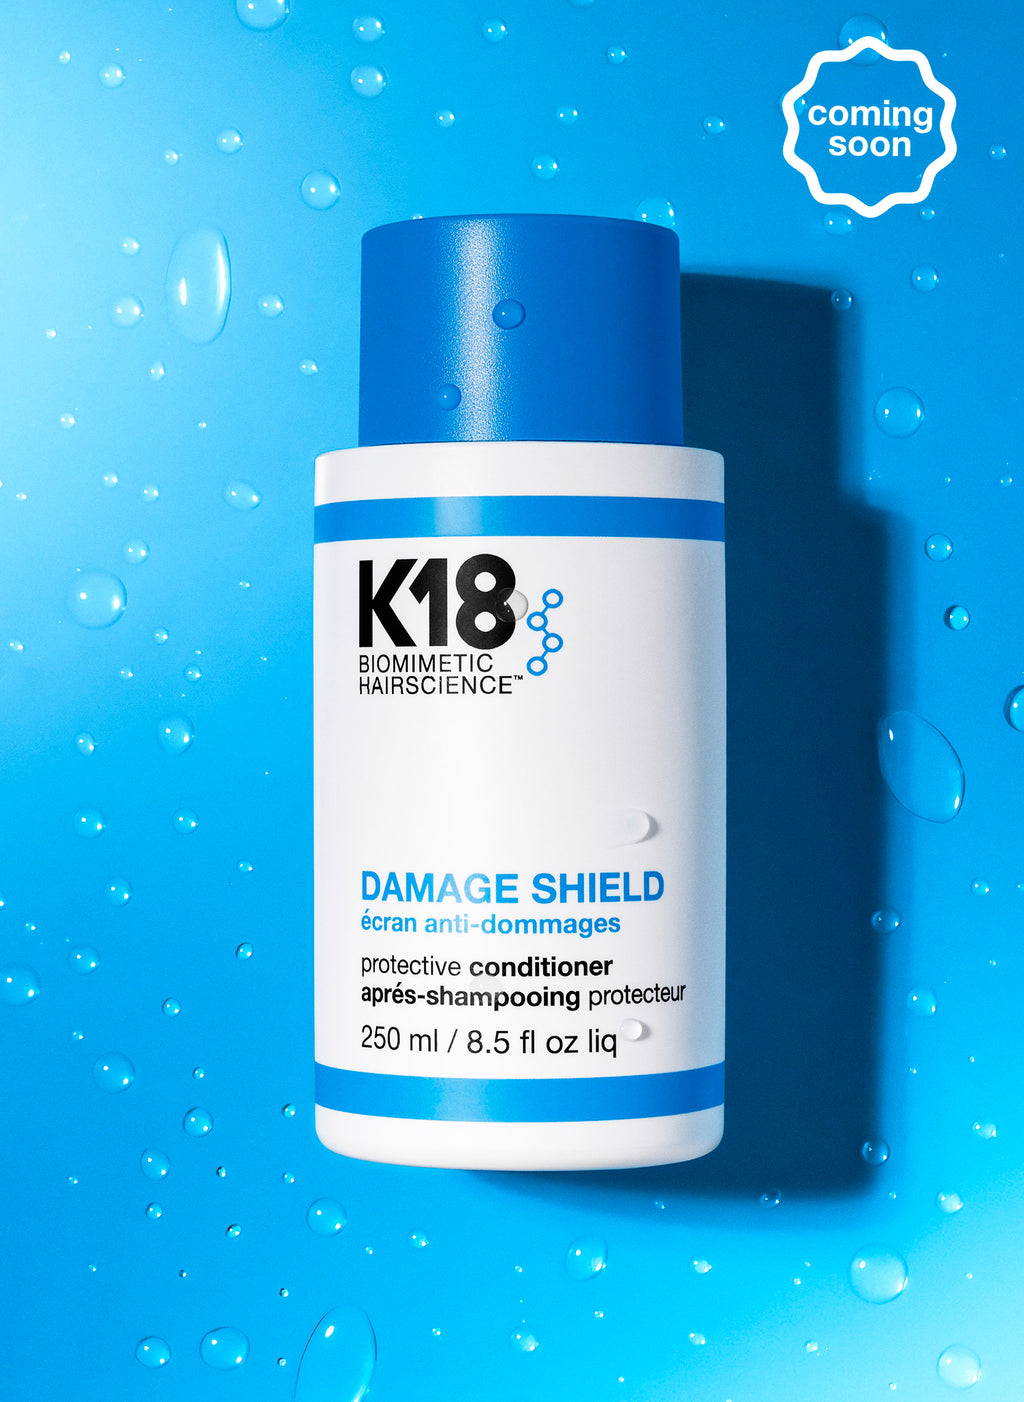 K18DAMAGE SHIELD protective conditioner Nourishing conditioner shields hair from daily damage